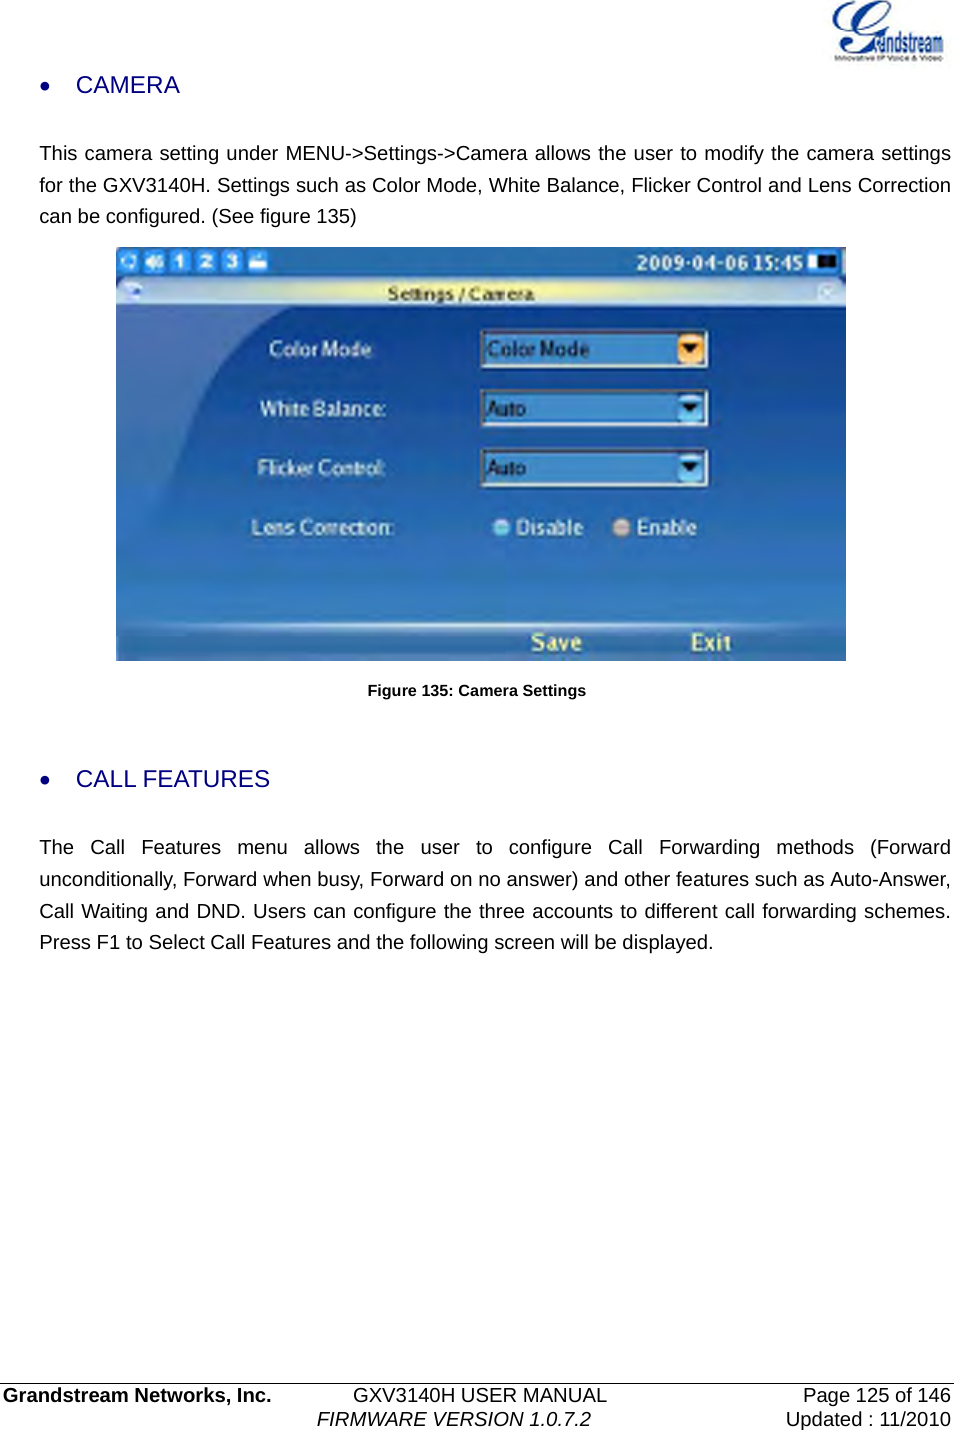   Grandstream Networks, Inc.        GXV3140H USER MANUAL                  Page 125 of 146                                FIRMWARE VERSION 1.0.7.2 Updated : 11/2010  • CAMERA  This camera setting under MENU-&gt;Settings-&gt;Camera allows the user to modify the camera settings for the GXV3140H. Settings such as Color Mode, White Balance, Flicker Control and Lens Correction can be configured. (See figure 135)  Figure 135: Camera Settings  • CALL FEATURES  The Call Features menu allows the user to configure Call Forwarding methods (Forward unconditionally, Forward when busy, Forward on no answer) and other features such as Auto-Answer, Call Waiting and DND. Users can configure the three accounts to different call forwarding schemes. Press F1 to Select Call Features and the following screen will be displayed. 